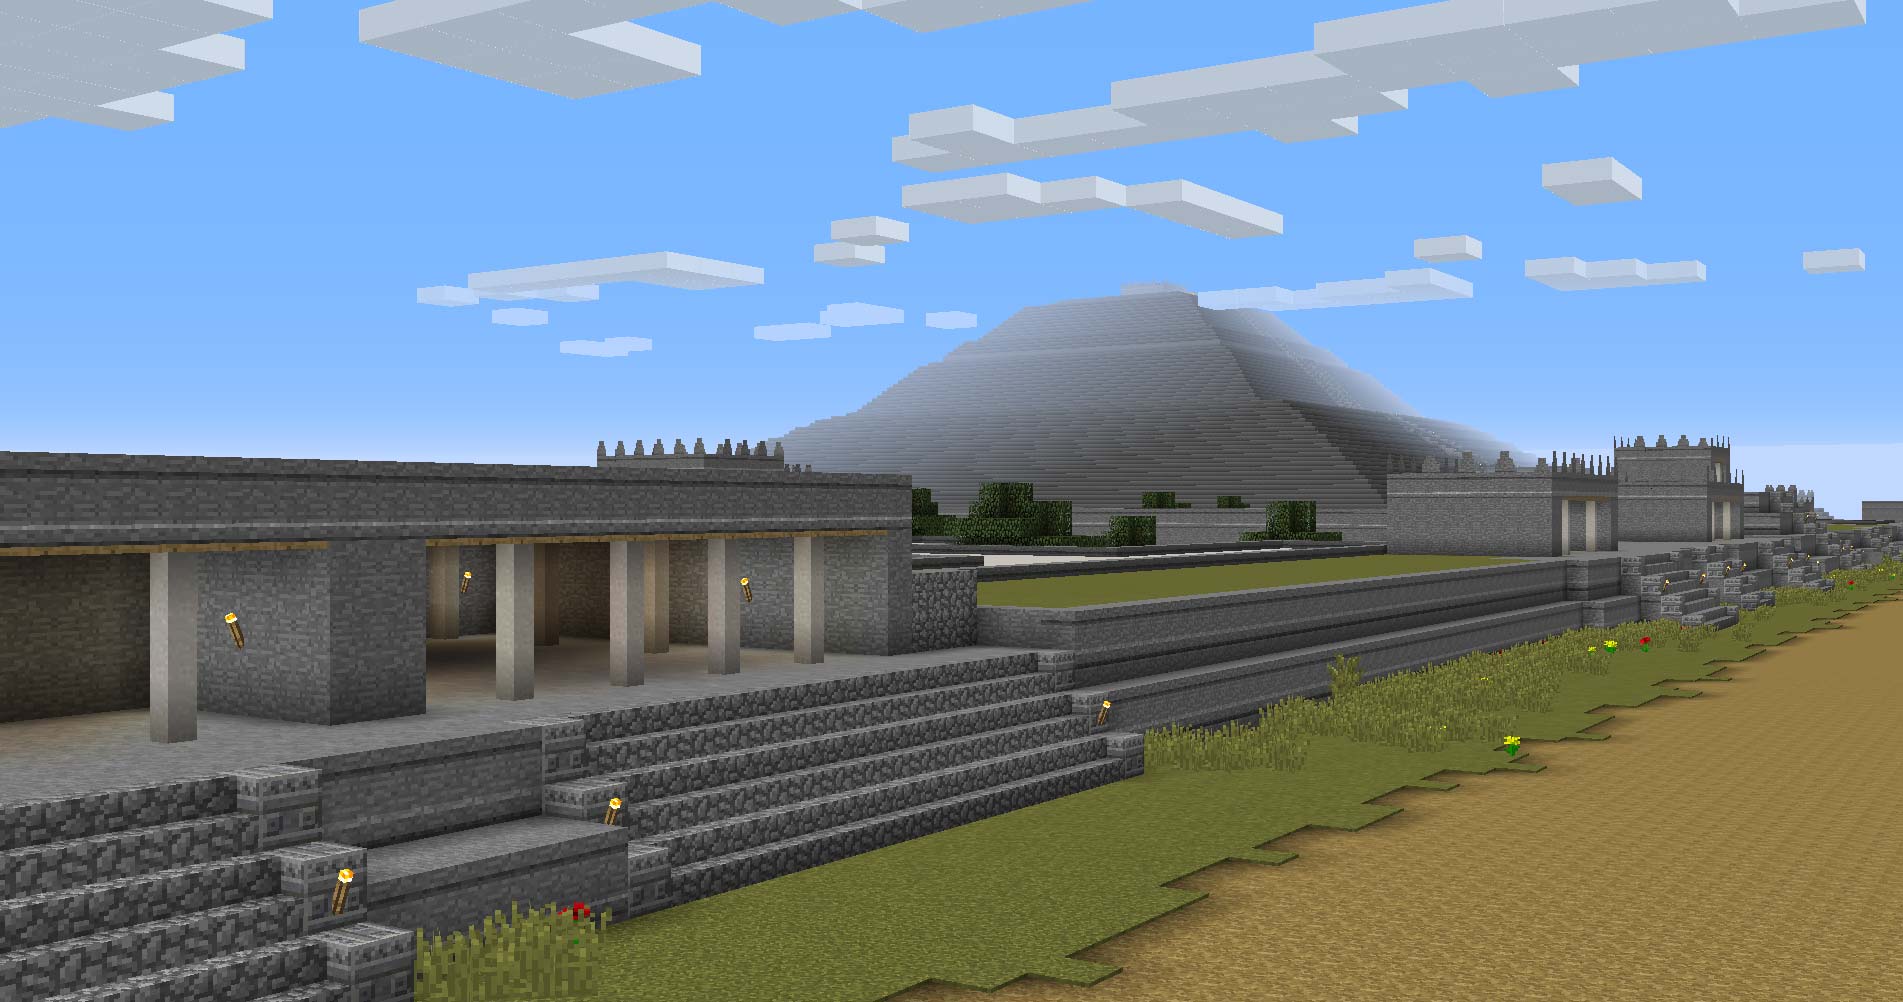 One of the first major building projects I did in Minecraft